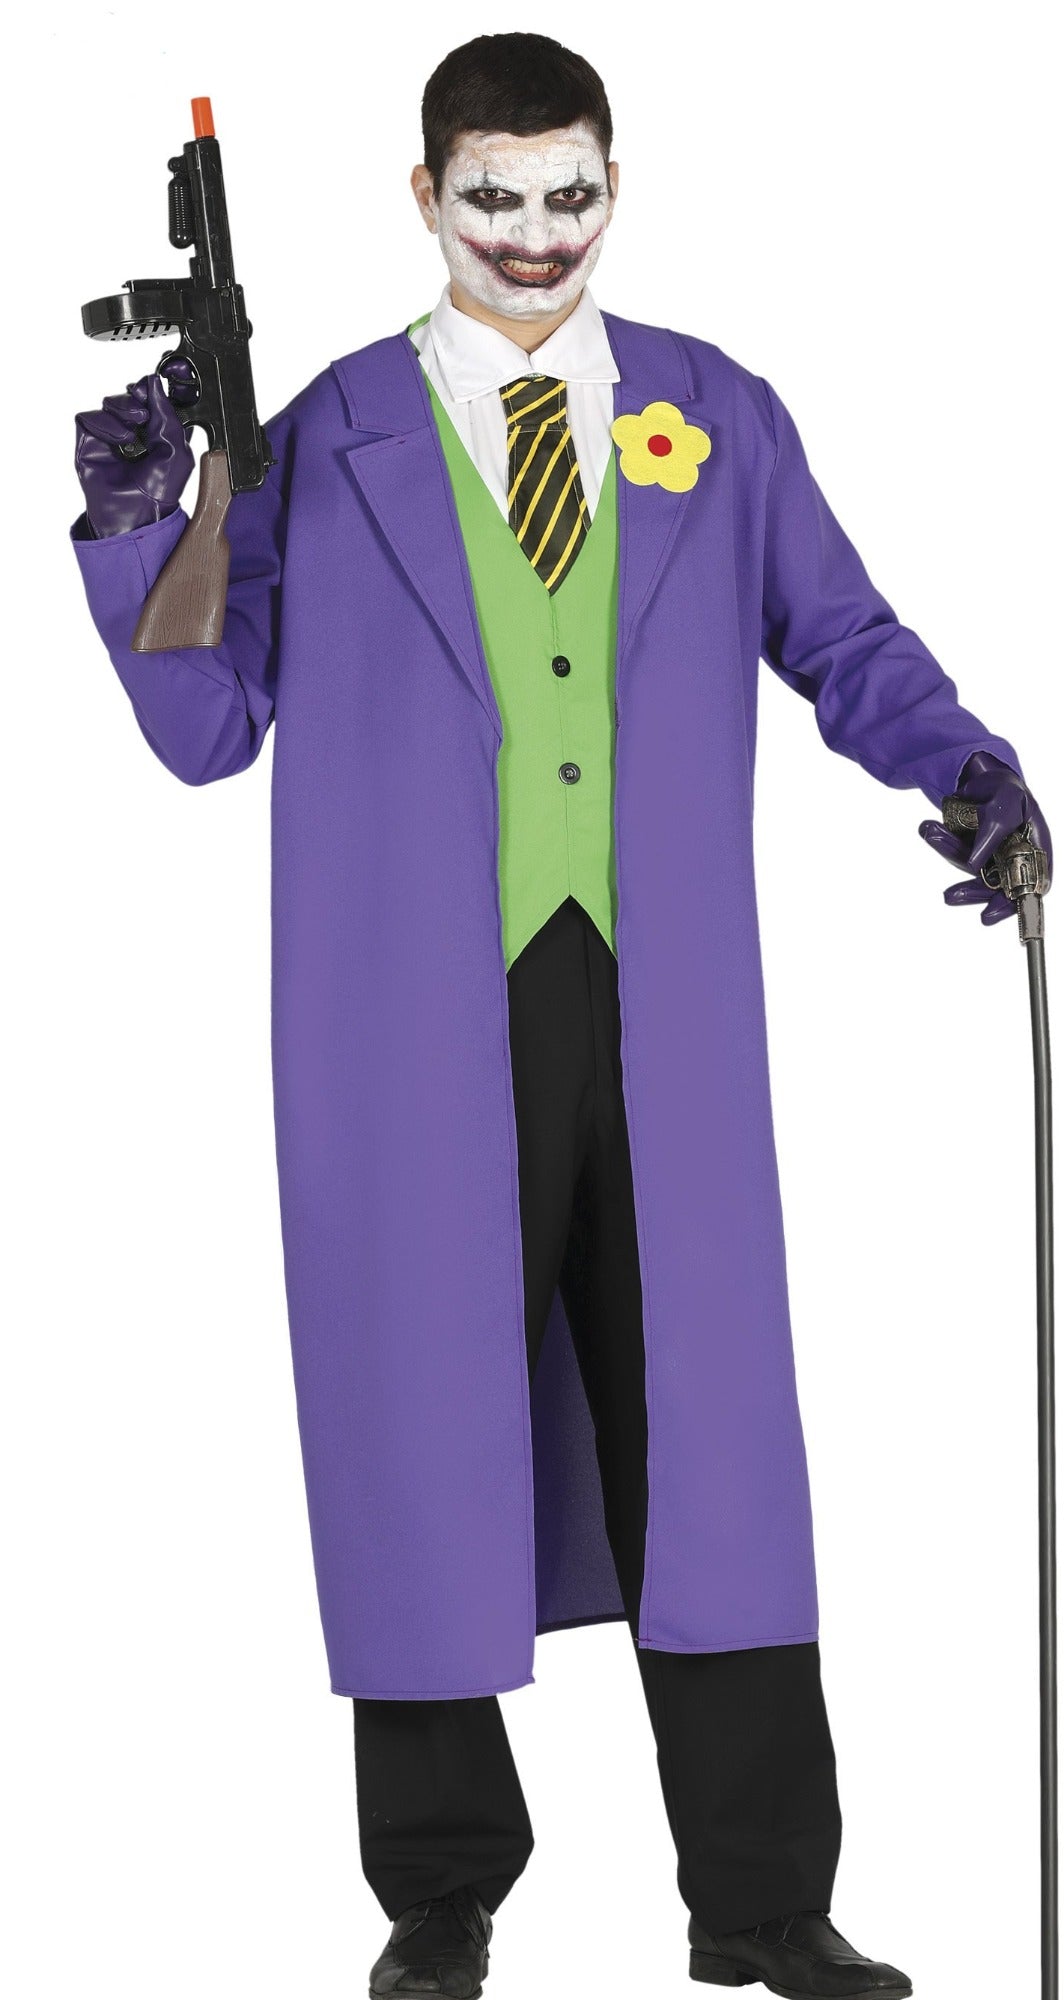 Joker style Costume includes the long purple coat with flower and green waistcoat